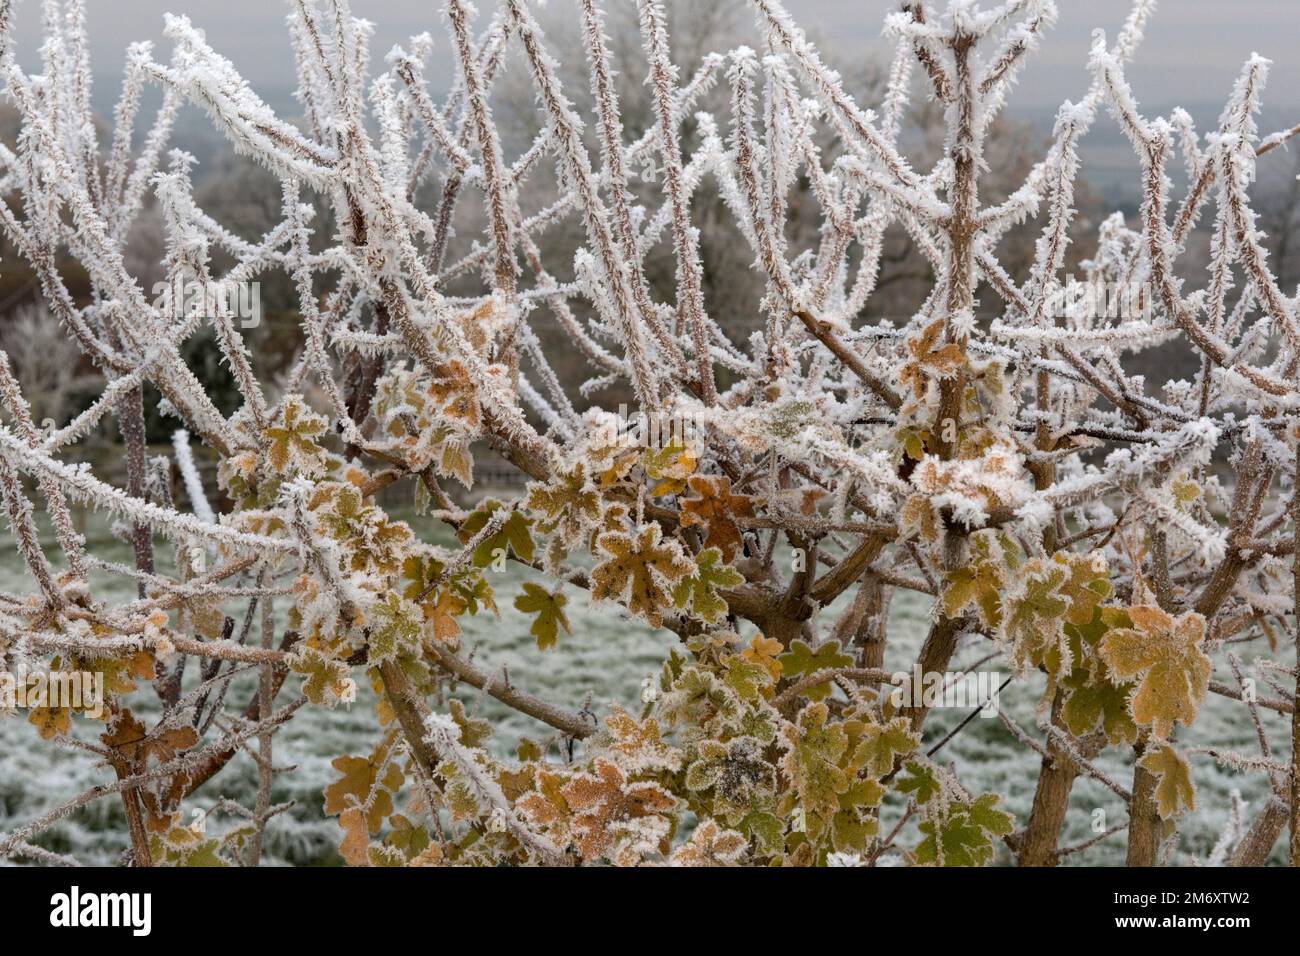 Hoar frost, rime ice, forning on the autumnal leaves and branches of a field maple (Acer campestre) hedgeon a cold grey winter morning, Berkshire, Dec Stock Photo